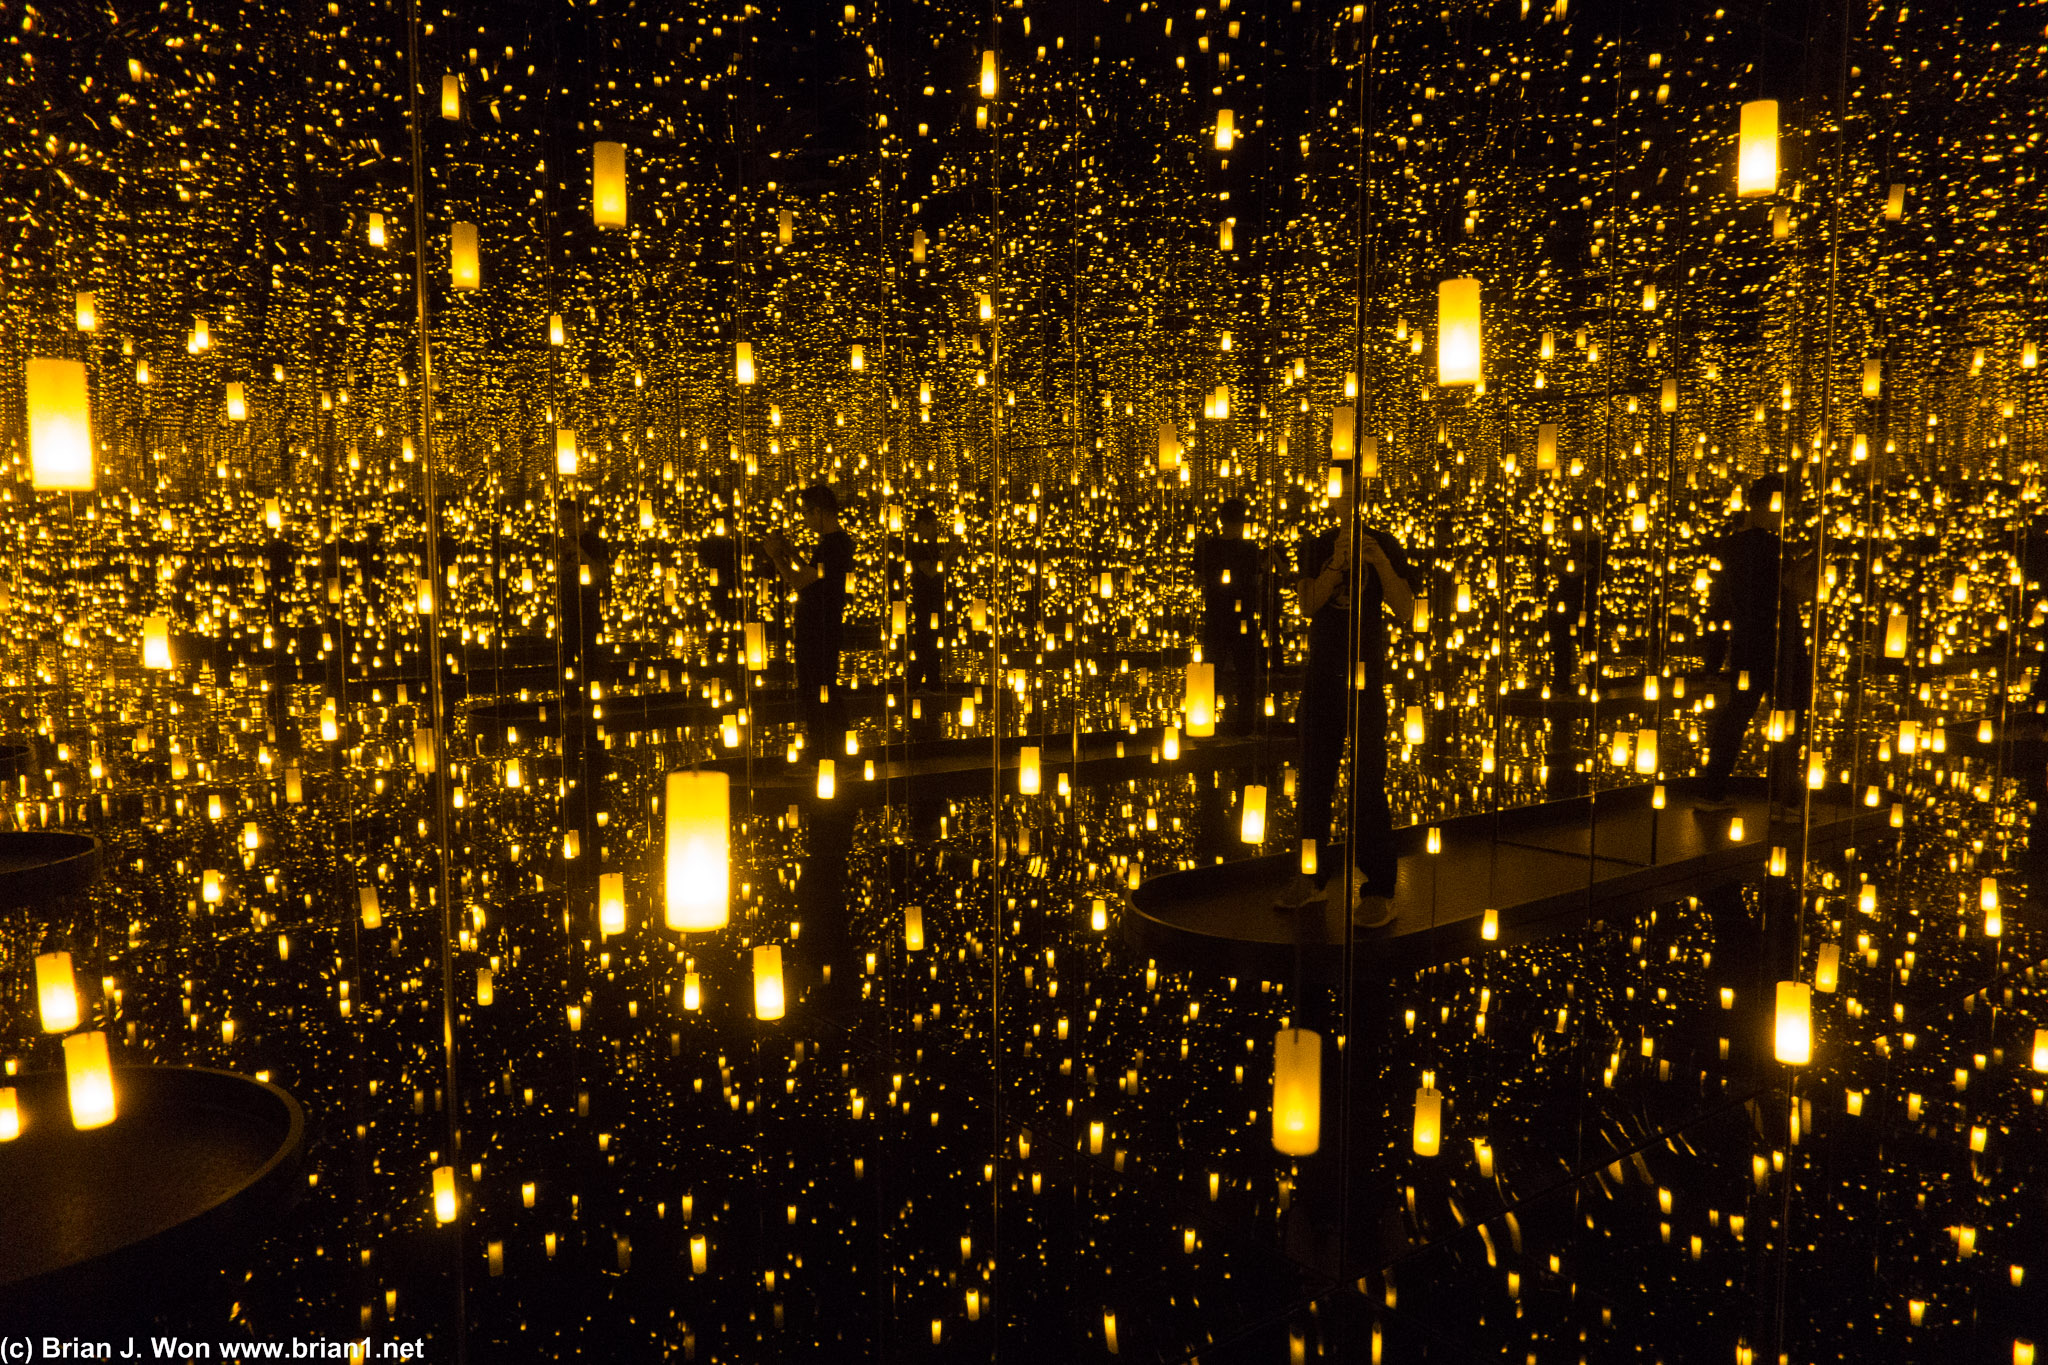 Infinity Mirrored Room - Aftermath of Obliteration of Eternity.